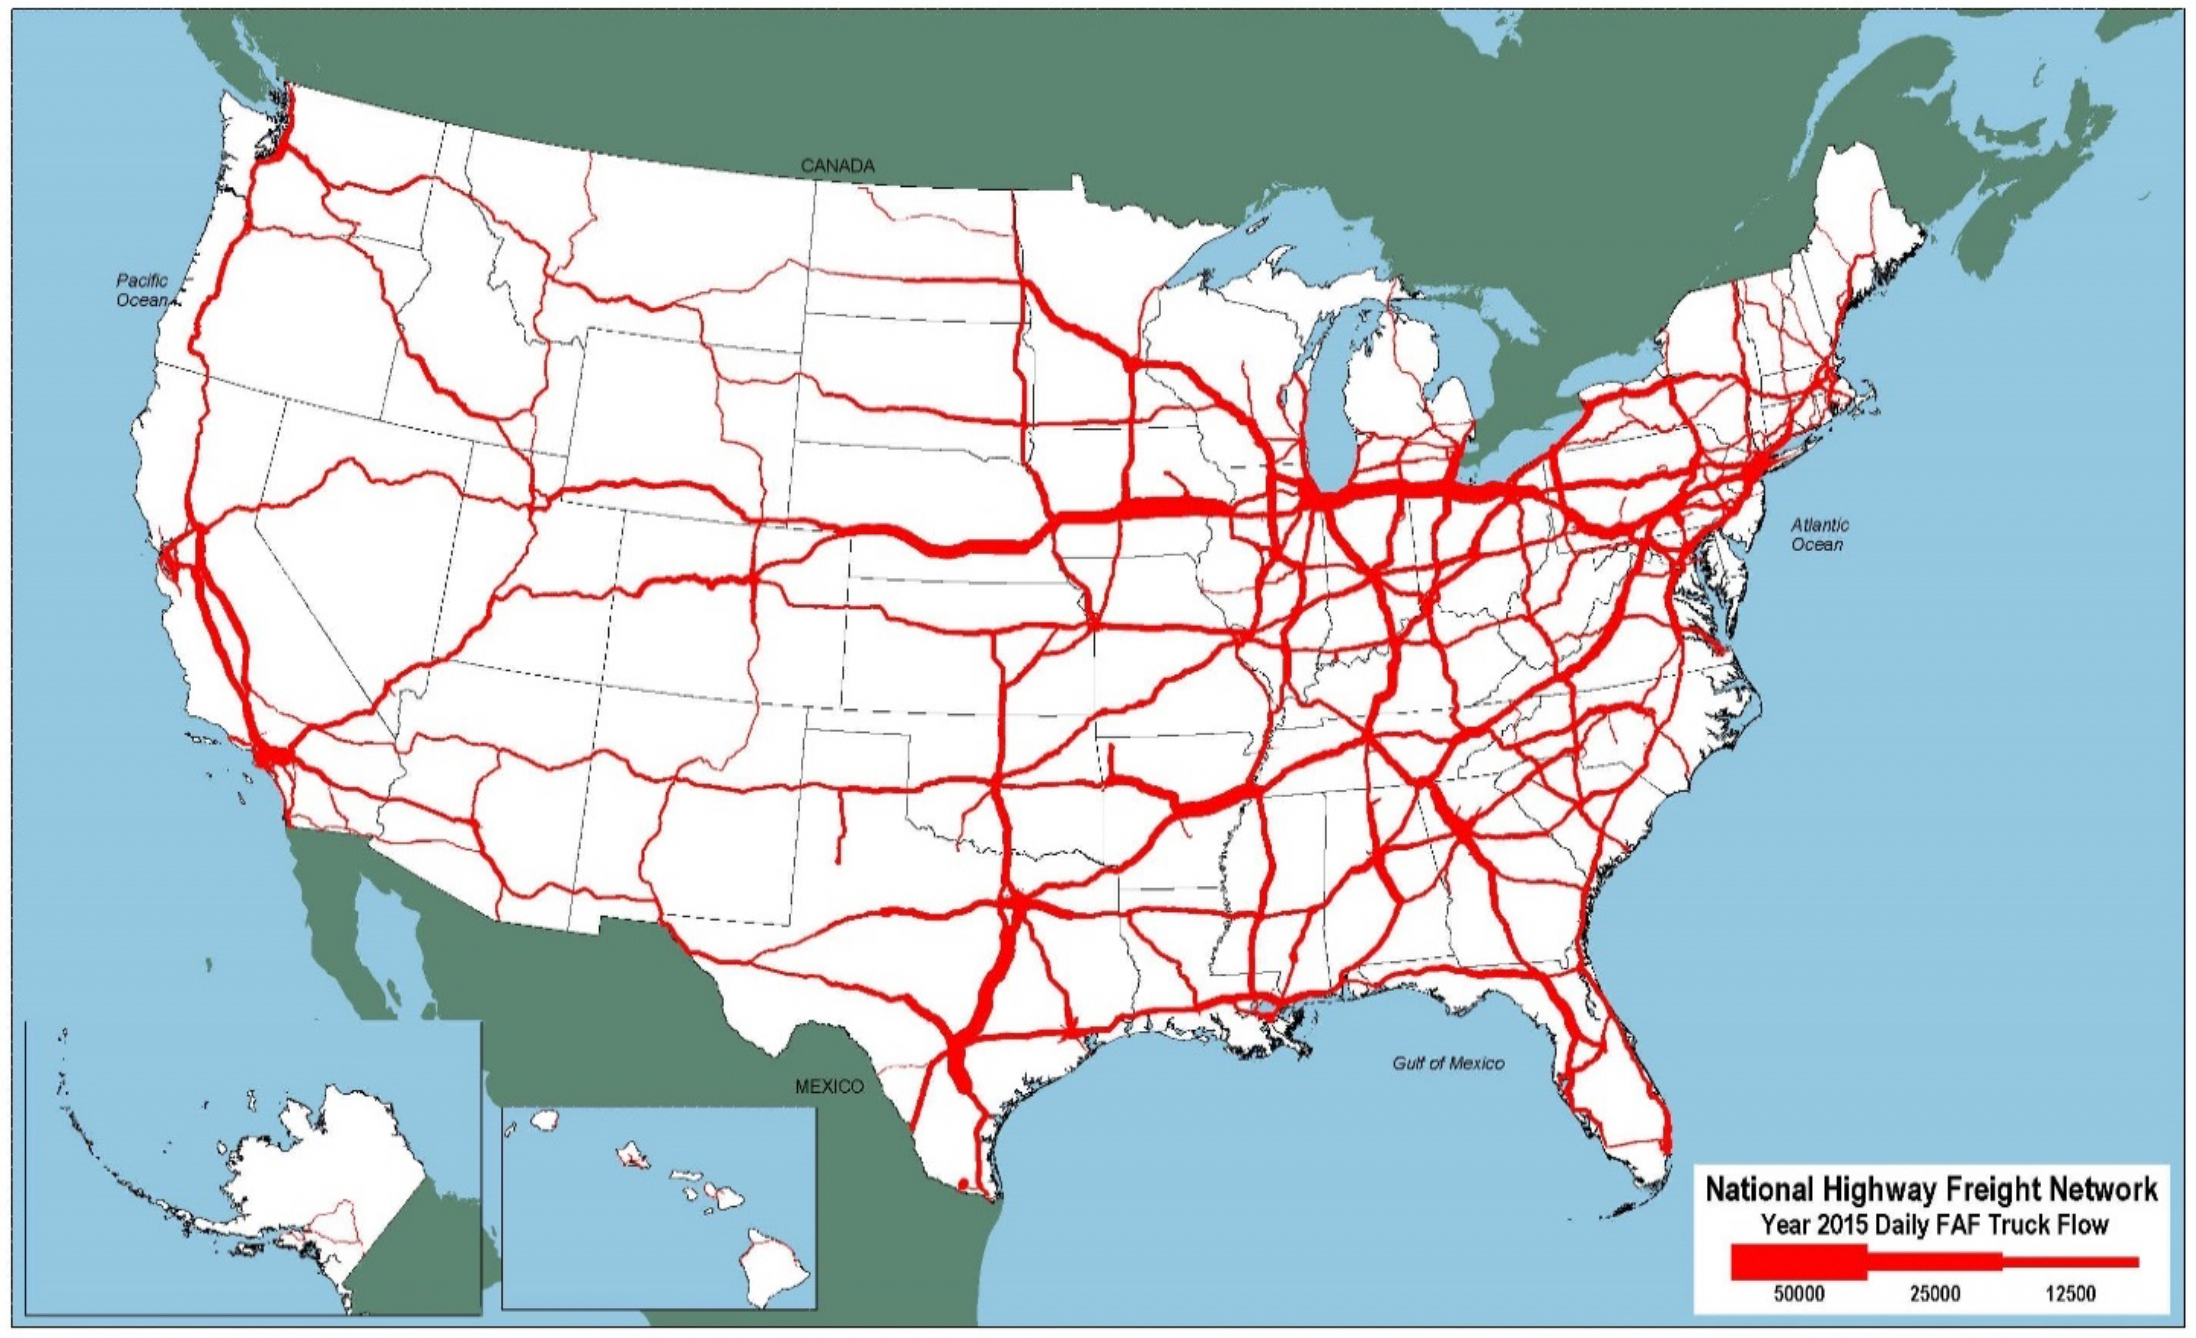 An outline map of the 48 contiguous States and insets for Alaska and Hawaii show long haul truck flows per day on the NHFN. Truck volume is indicated by line thickness for 60,000 trucks per day, 25,000 trucks per day, and 12,500 trucks per day. The heaviest volume is in the region that includes the East Coast and Midwest States; heavy volume is also shown across the southern States and California.